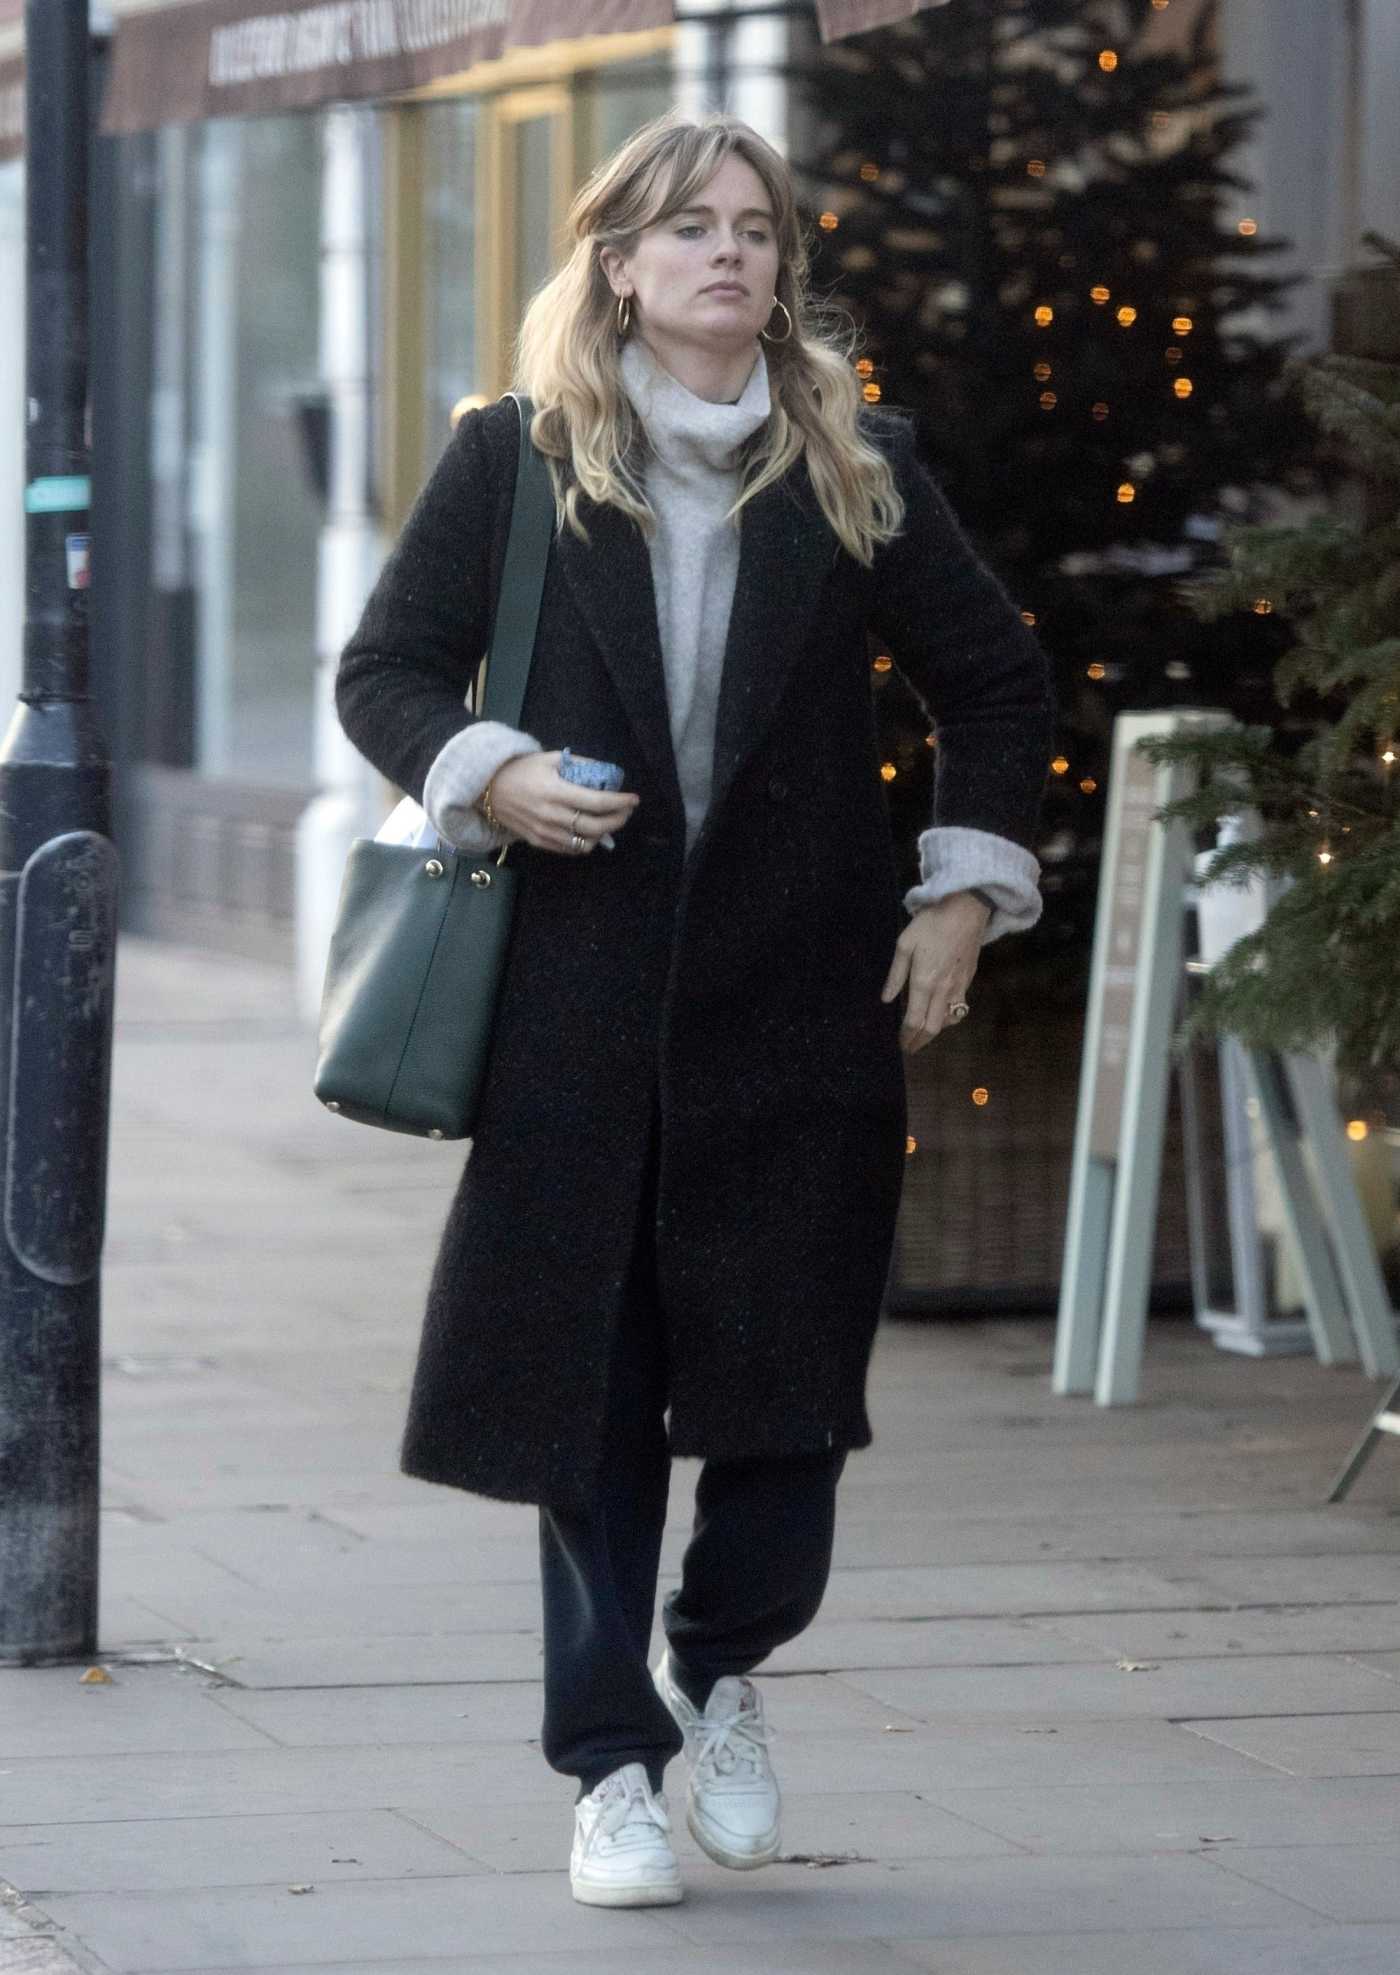 Cressida Bonas in a Black Coat Was Seen Out in Notting Hill, London 12/02/2020